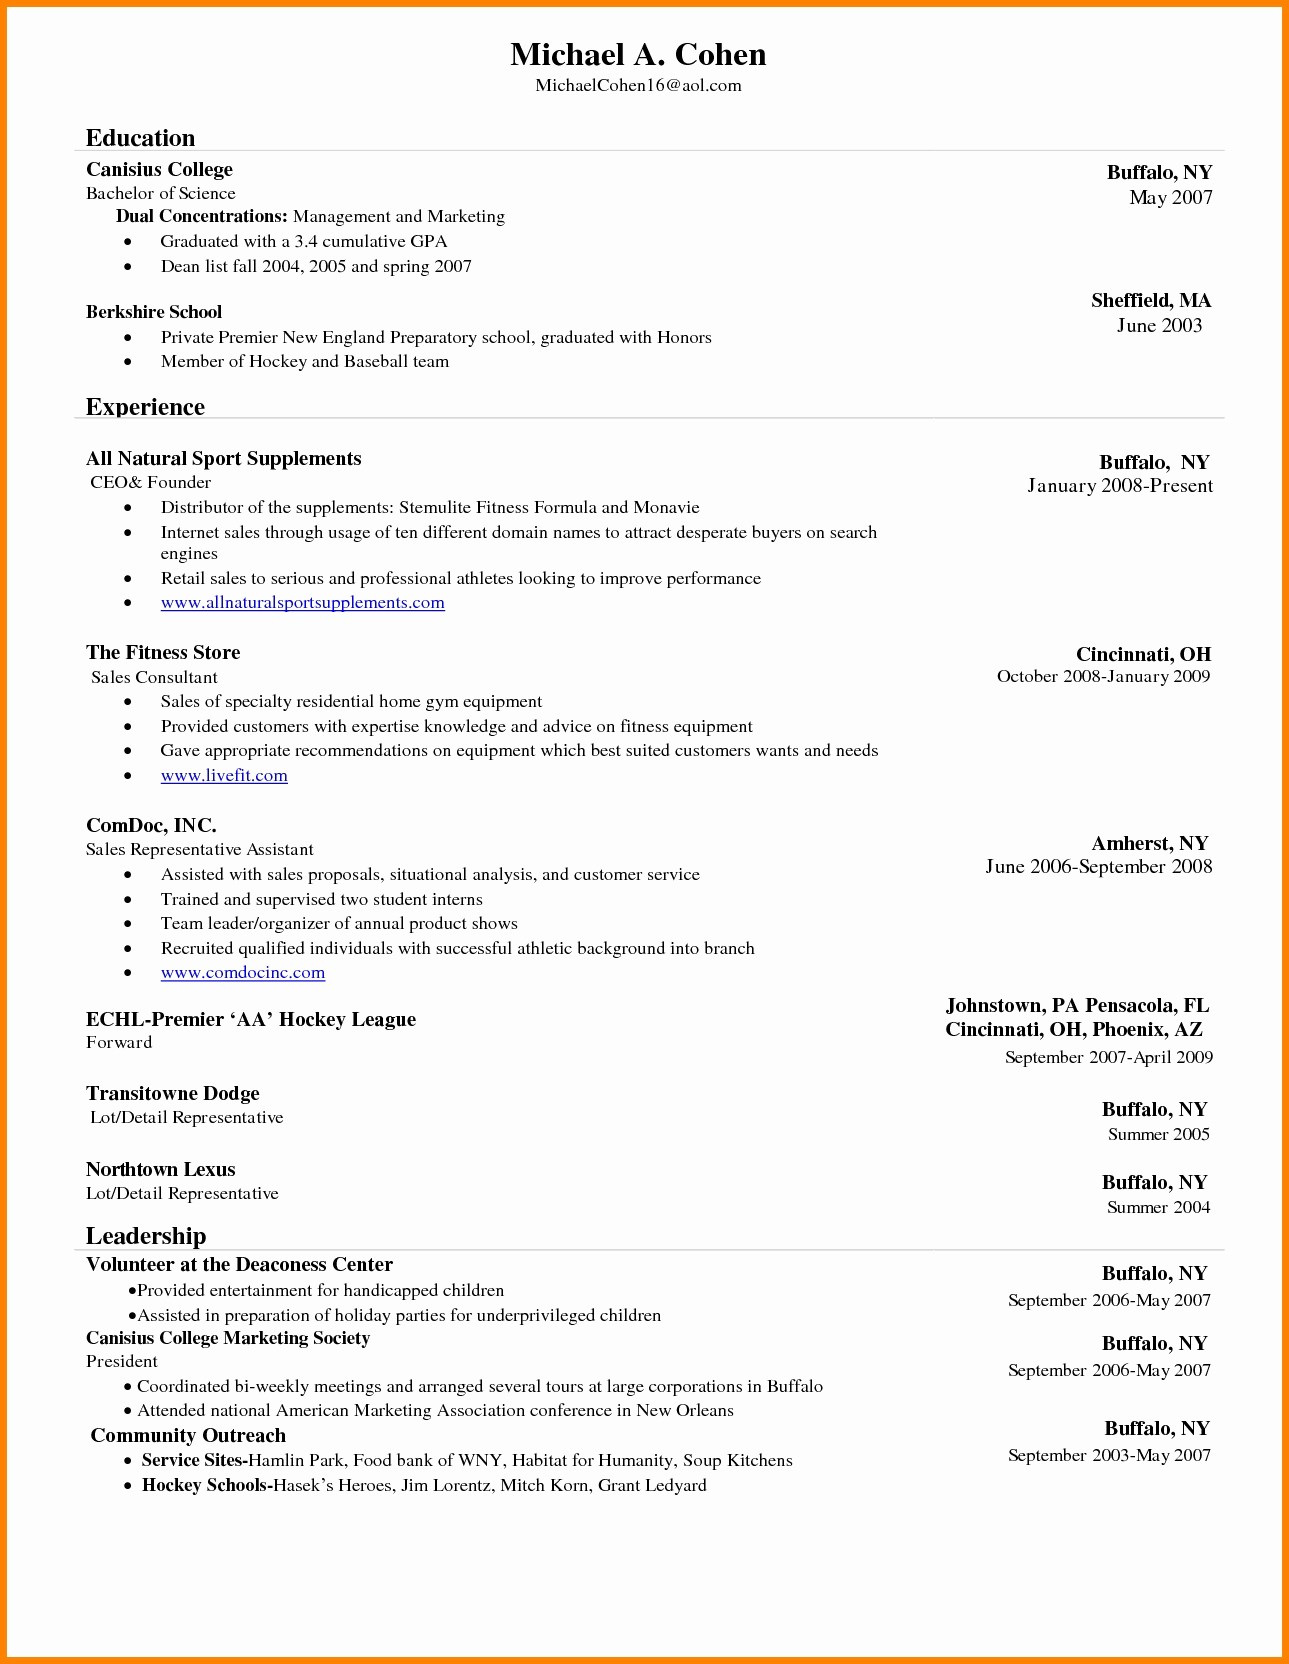 Ms Word Template for Resume Luxury Resume Template Microsoft Word 2017